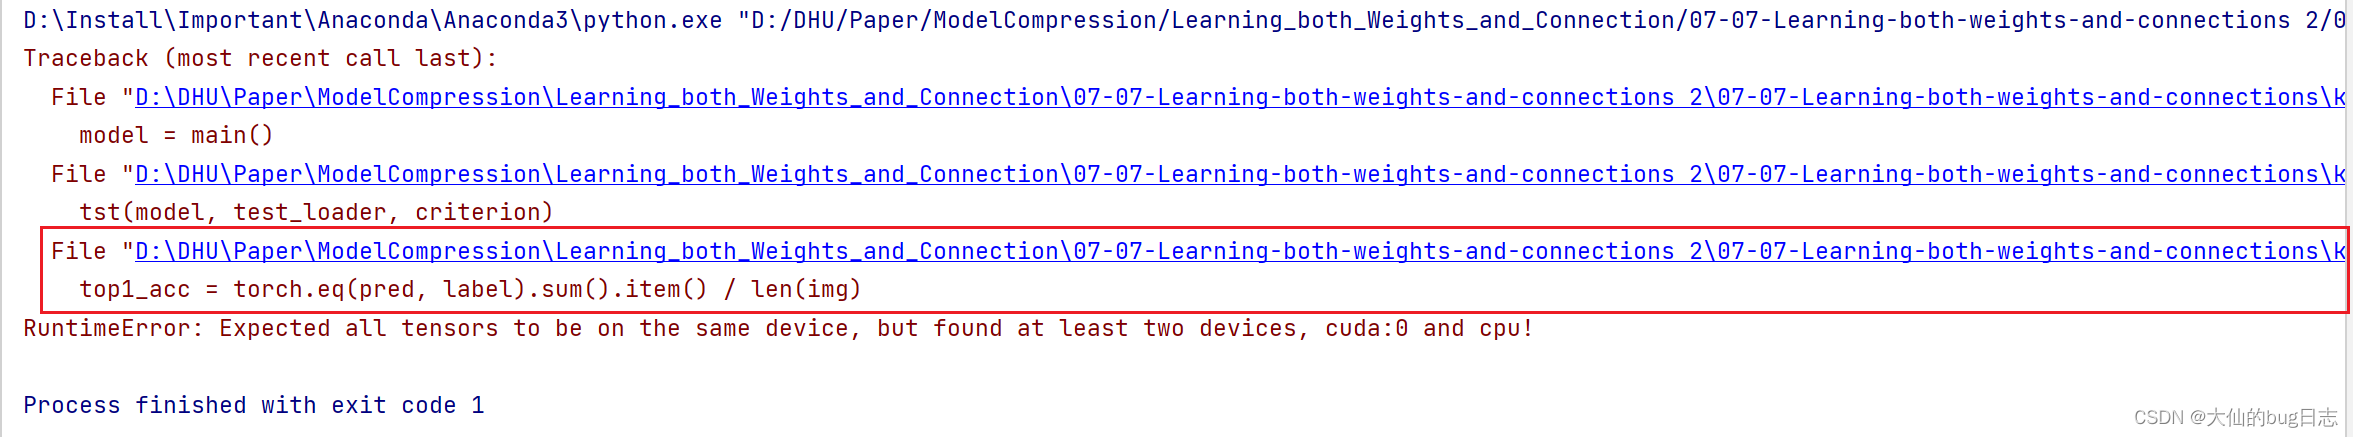 Expected all tensors to be on the same device, but found at least two devices, cuda:0 and cpu!